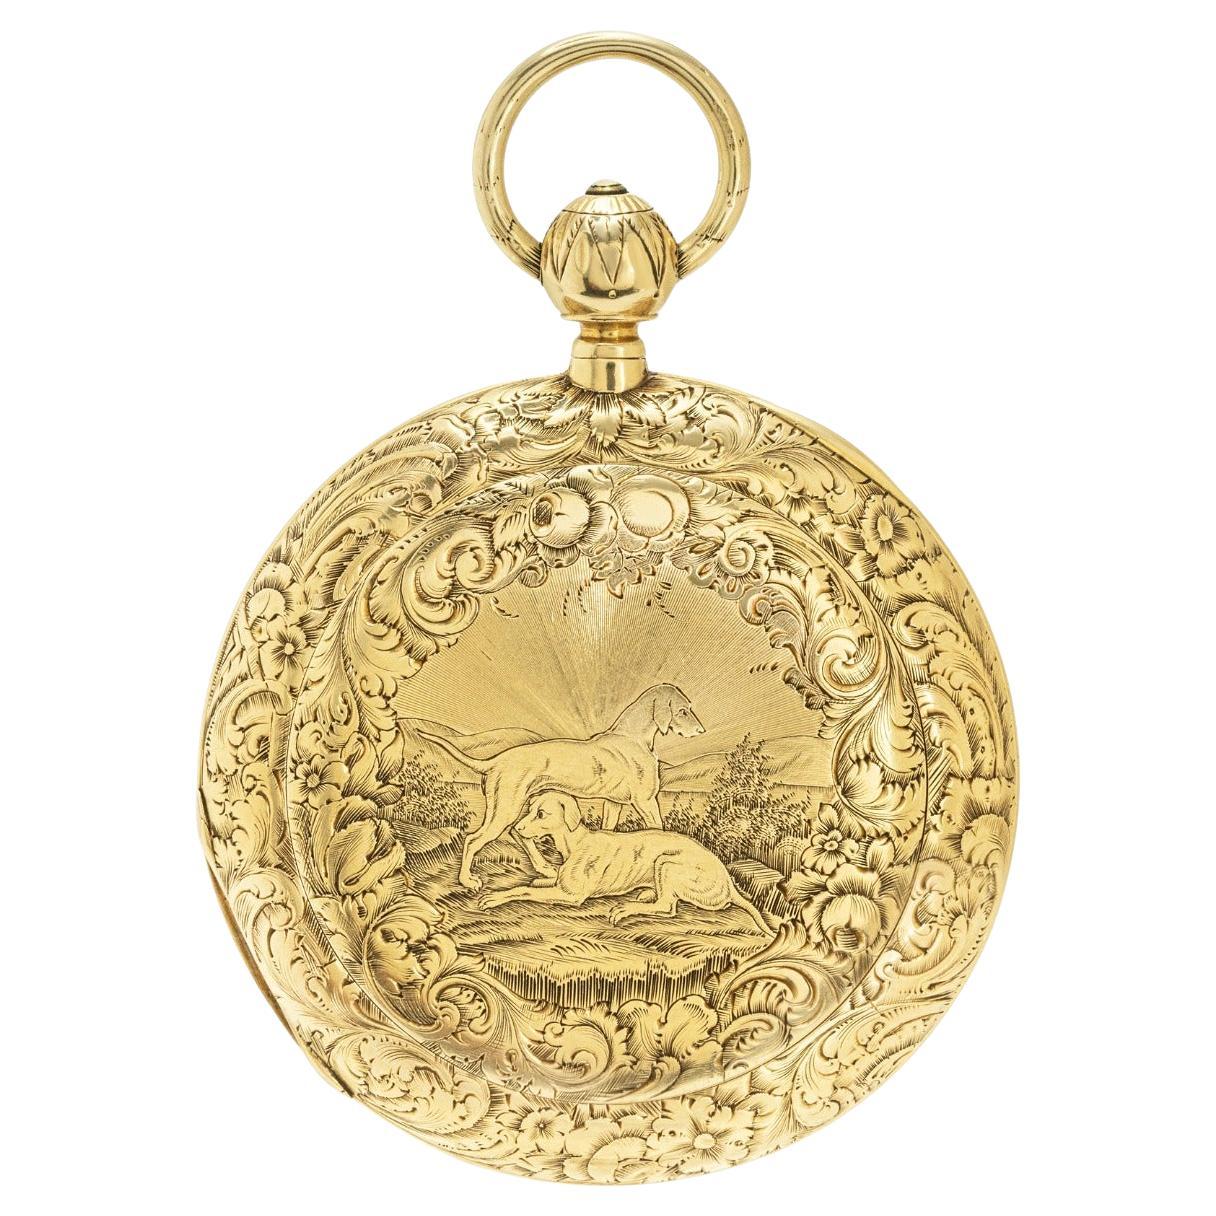 John Cragg. A Rare and Important Heavy 18ct Yellow Gold Cabriolet Keywind Fusee Lever Pocket Watch C1850

Dial: The white enamel dial signed John Cragg London with Roman numerals outer minute track and subsidiary seconds dial at six o'clock. The